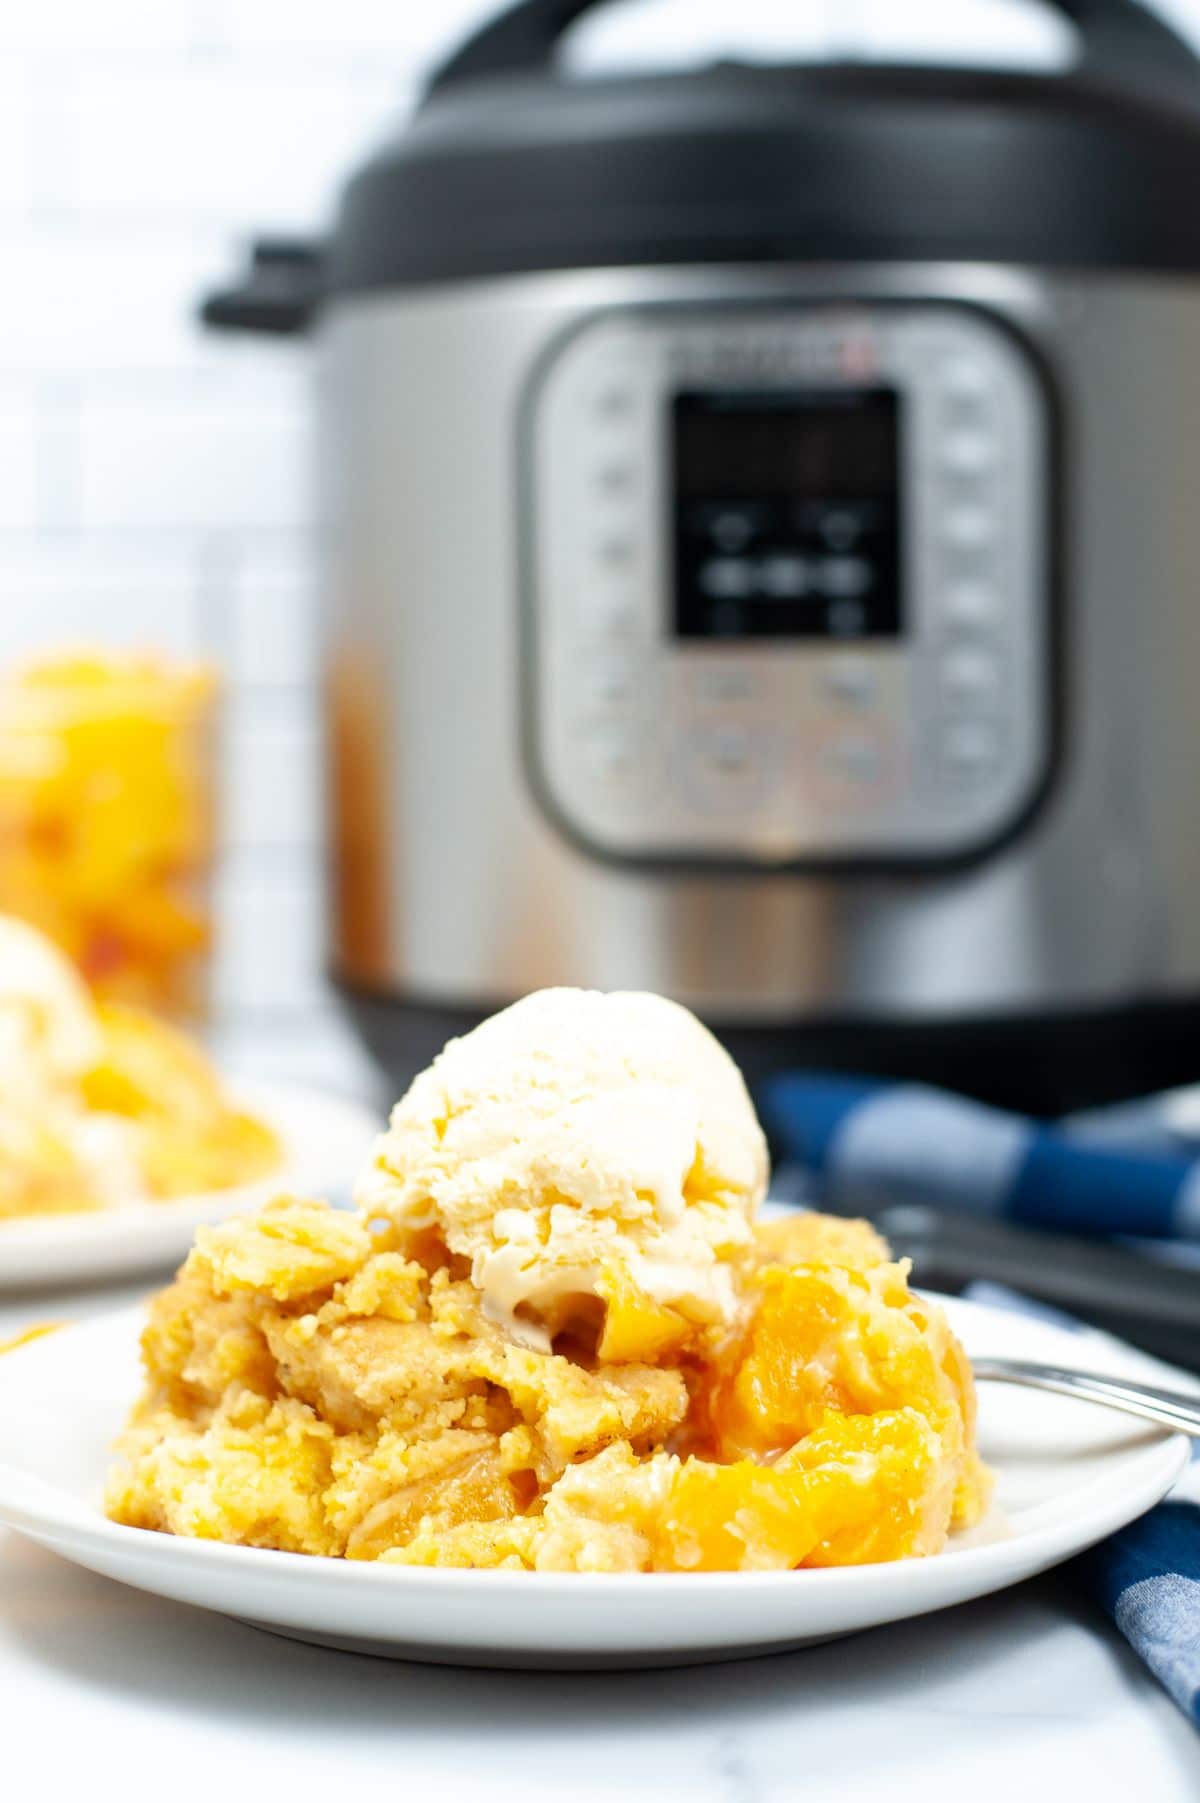 A vertical image of Instant Peach Cobbler topped with a scoop of ice cream on a white serving plate, shot from the side to emphasize the layers of the peach cobbler.